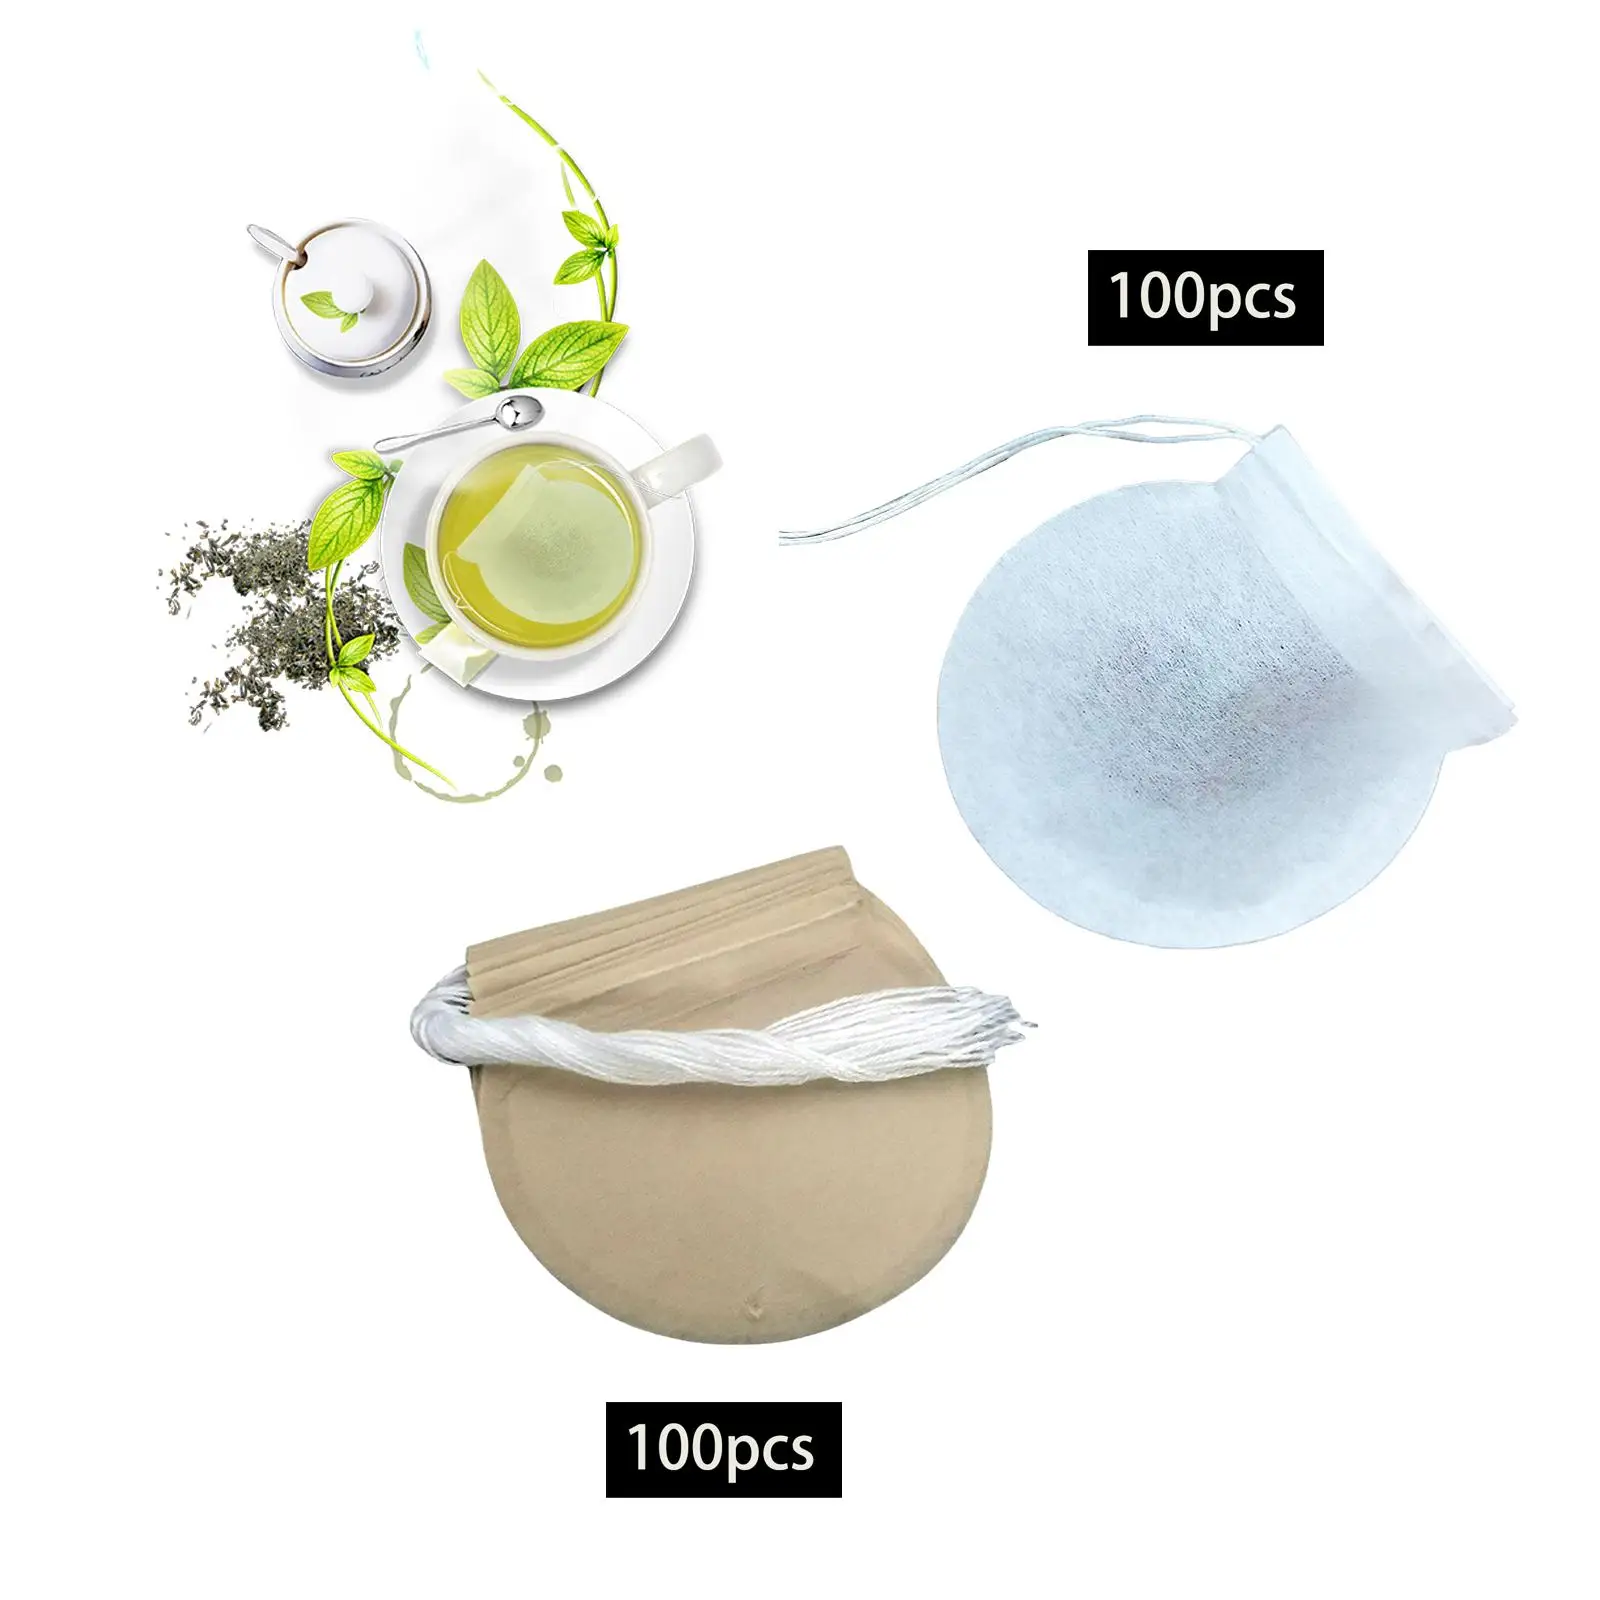 100Pcs Tea Filter Bags Pepper Spices Tea Infuser with Drawstring Coffee Seal Filter Bags Loose Tea Infuser Empty Tea Filter Bag